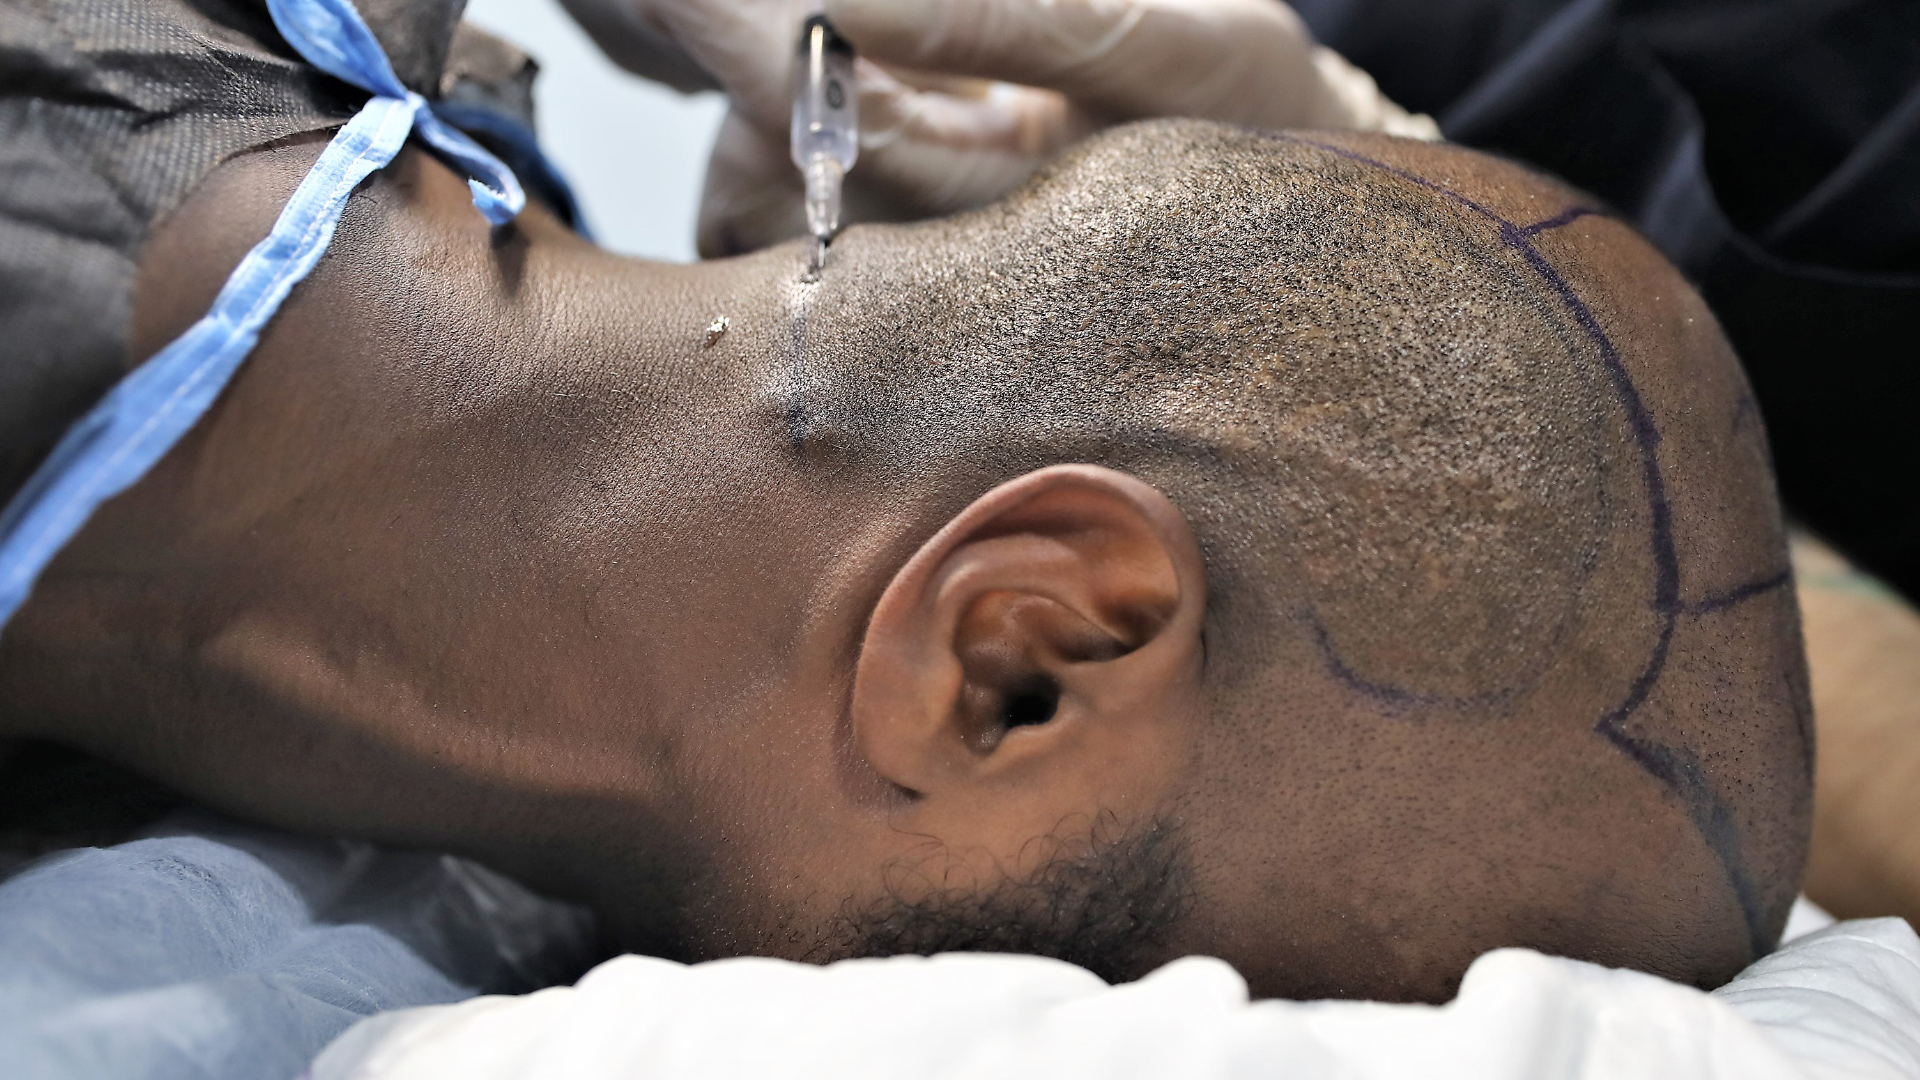 a patient has hair follicles removed from his donor area at the back of his skull as part of a hair graft